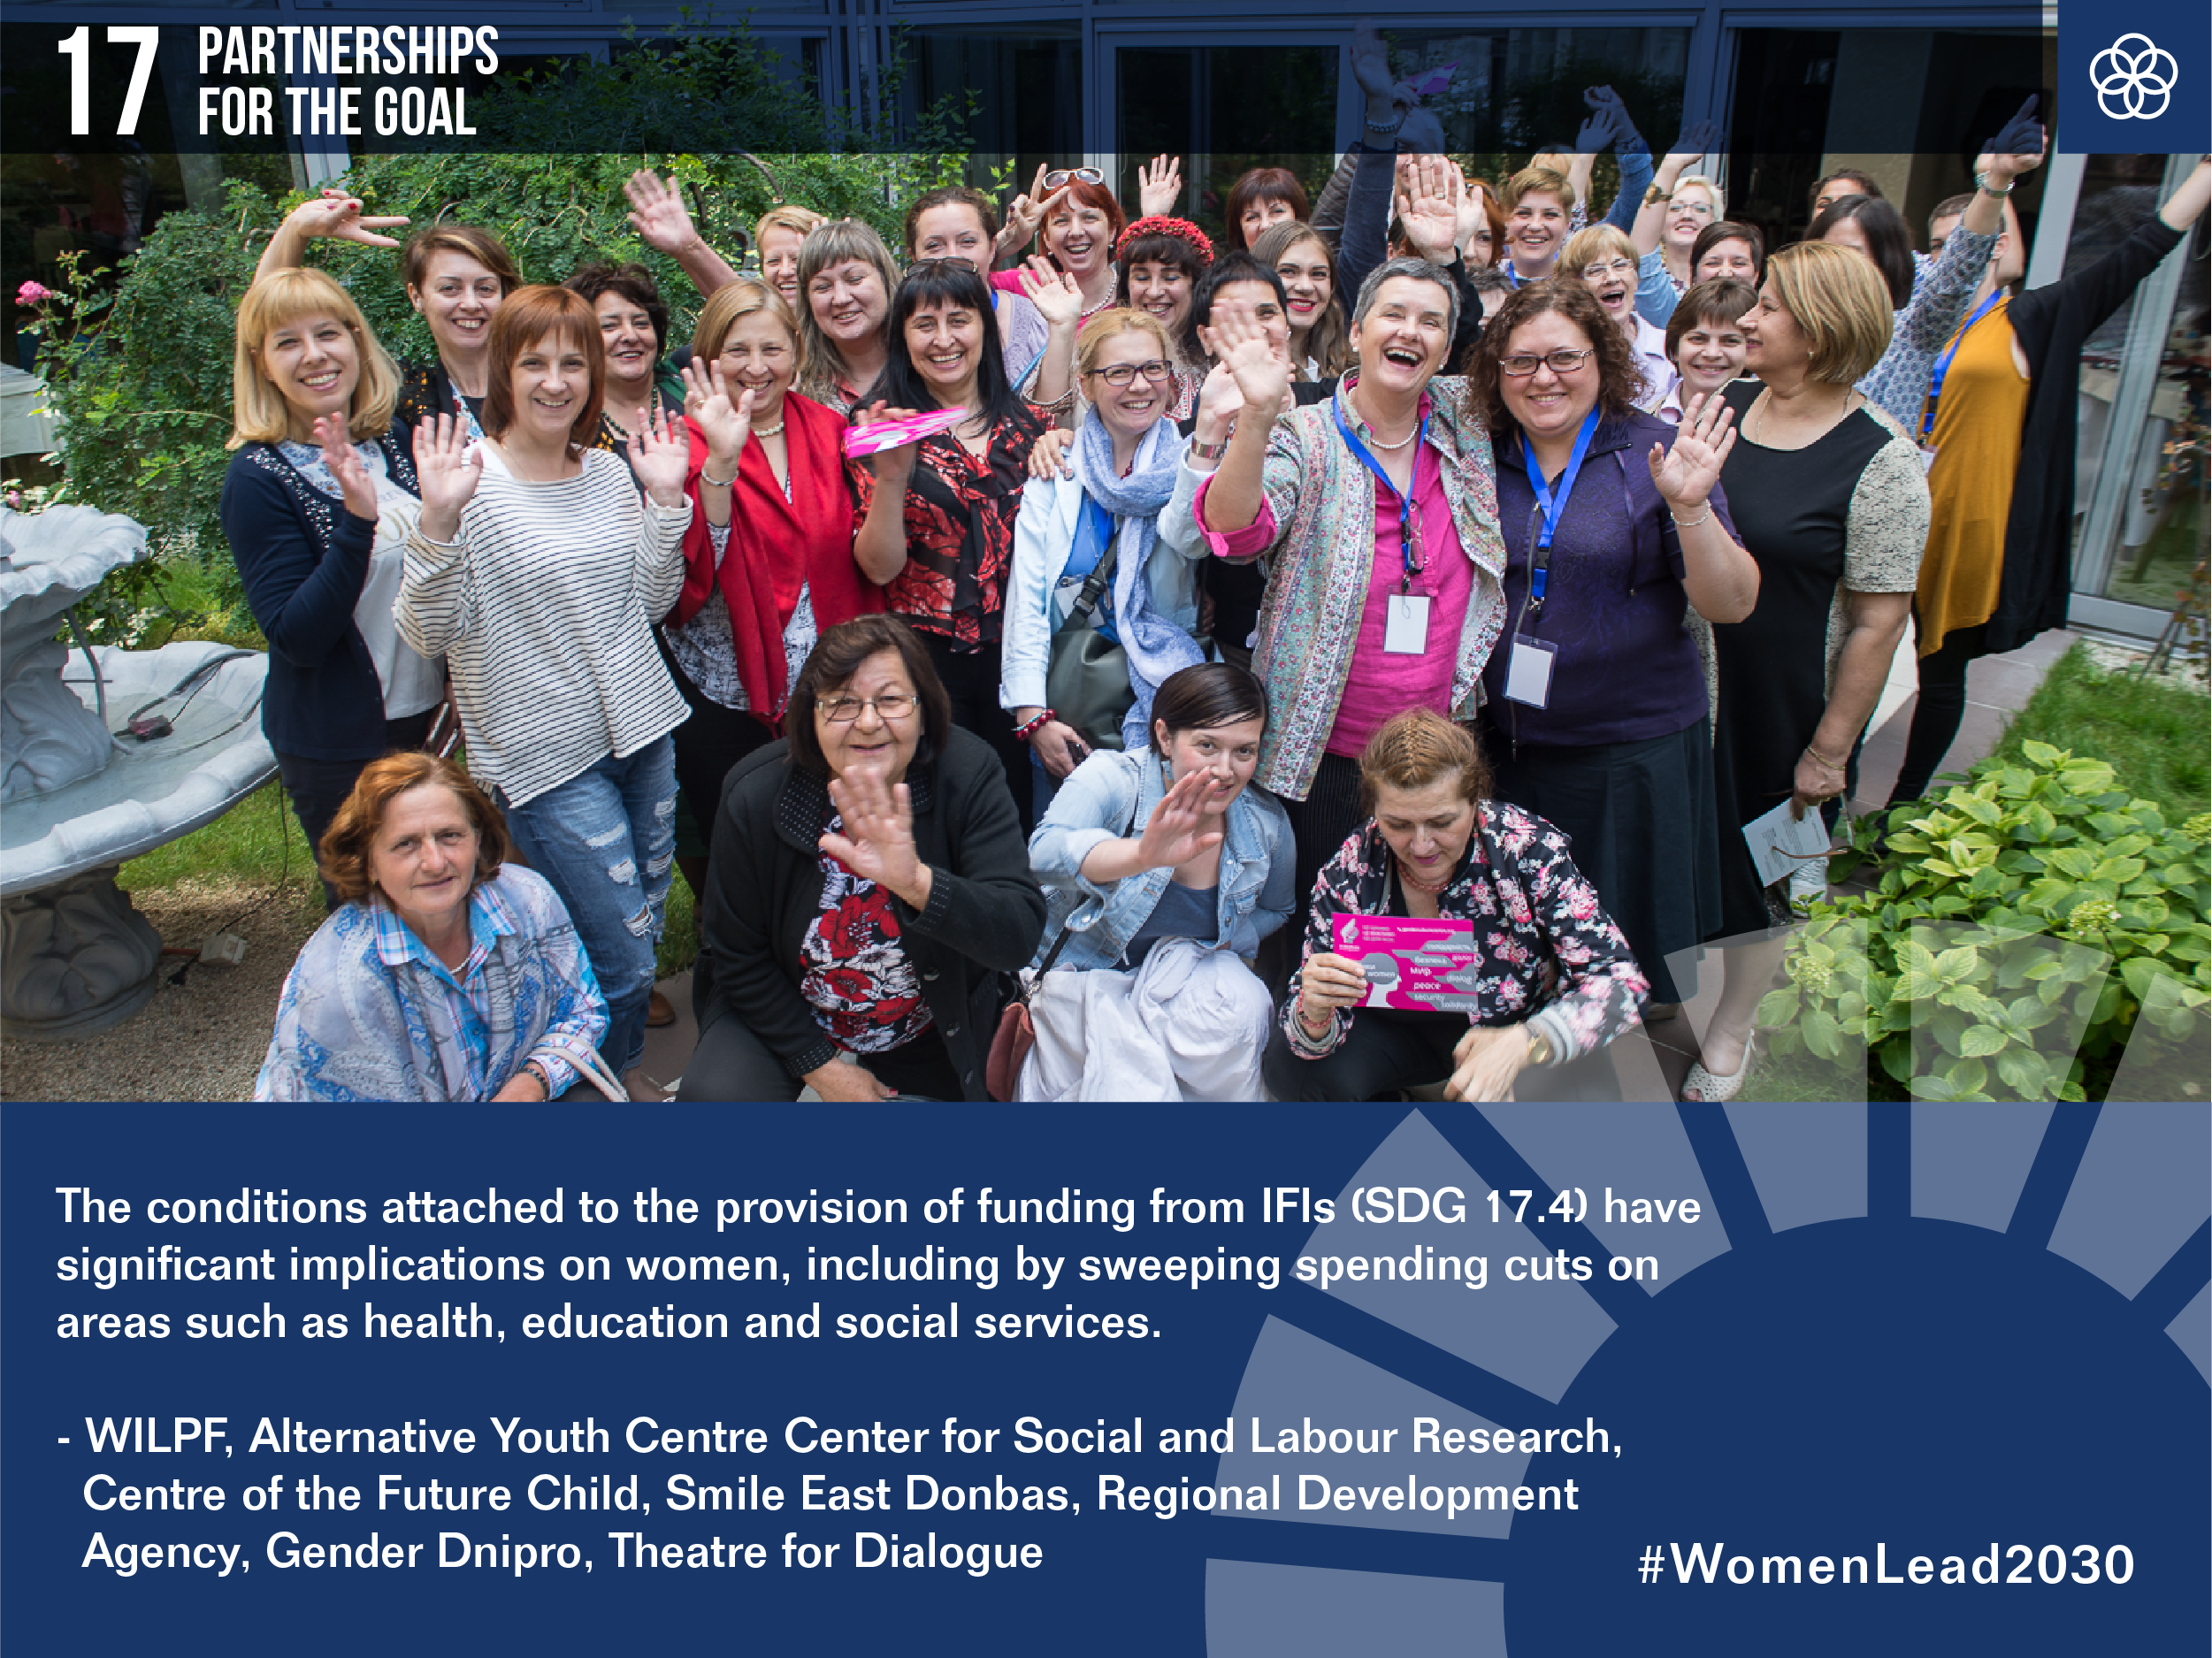 17 Partnerships for the Goal

A photo of a group of women smiling

Quote:
The conditions attached to the provision of funding from IFIs (SDG 14, 4) have significant implications on women, including by sweeping spending cuts on areas such as health, education and social services. 
WILPF, Alternative Youth Centre Center for Social and Labour Research, Centre of the Future Child, Smile East Donbas, Regional Development Agency, Gender Dnipro, Theatre for Dialogue